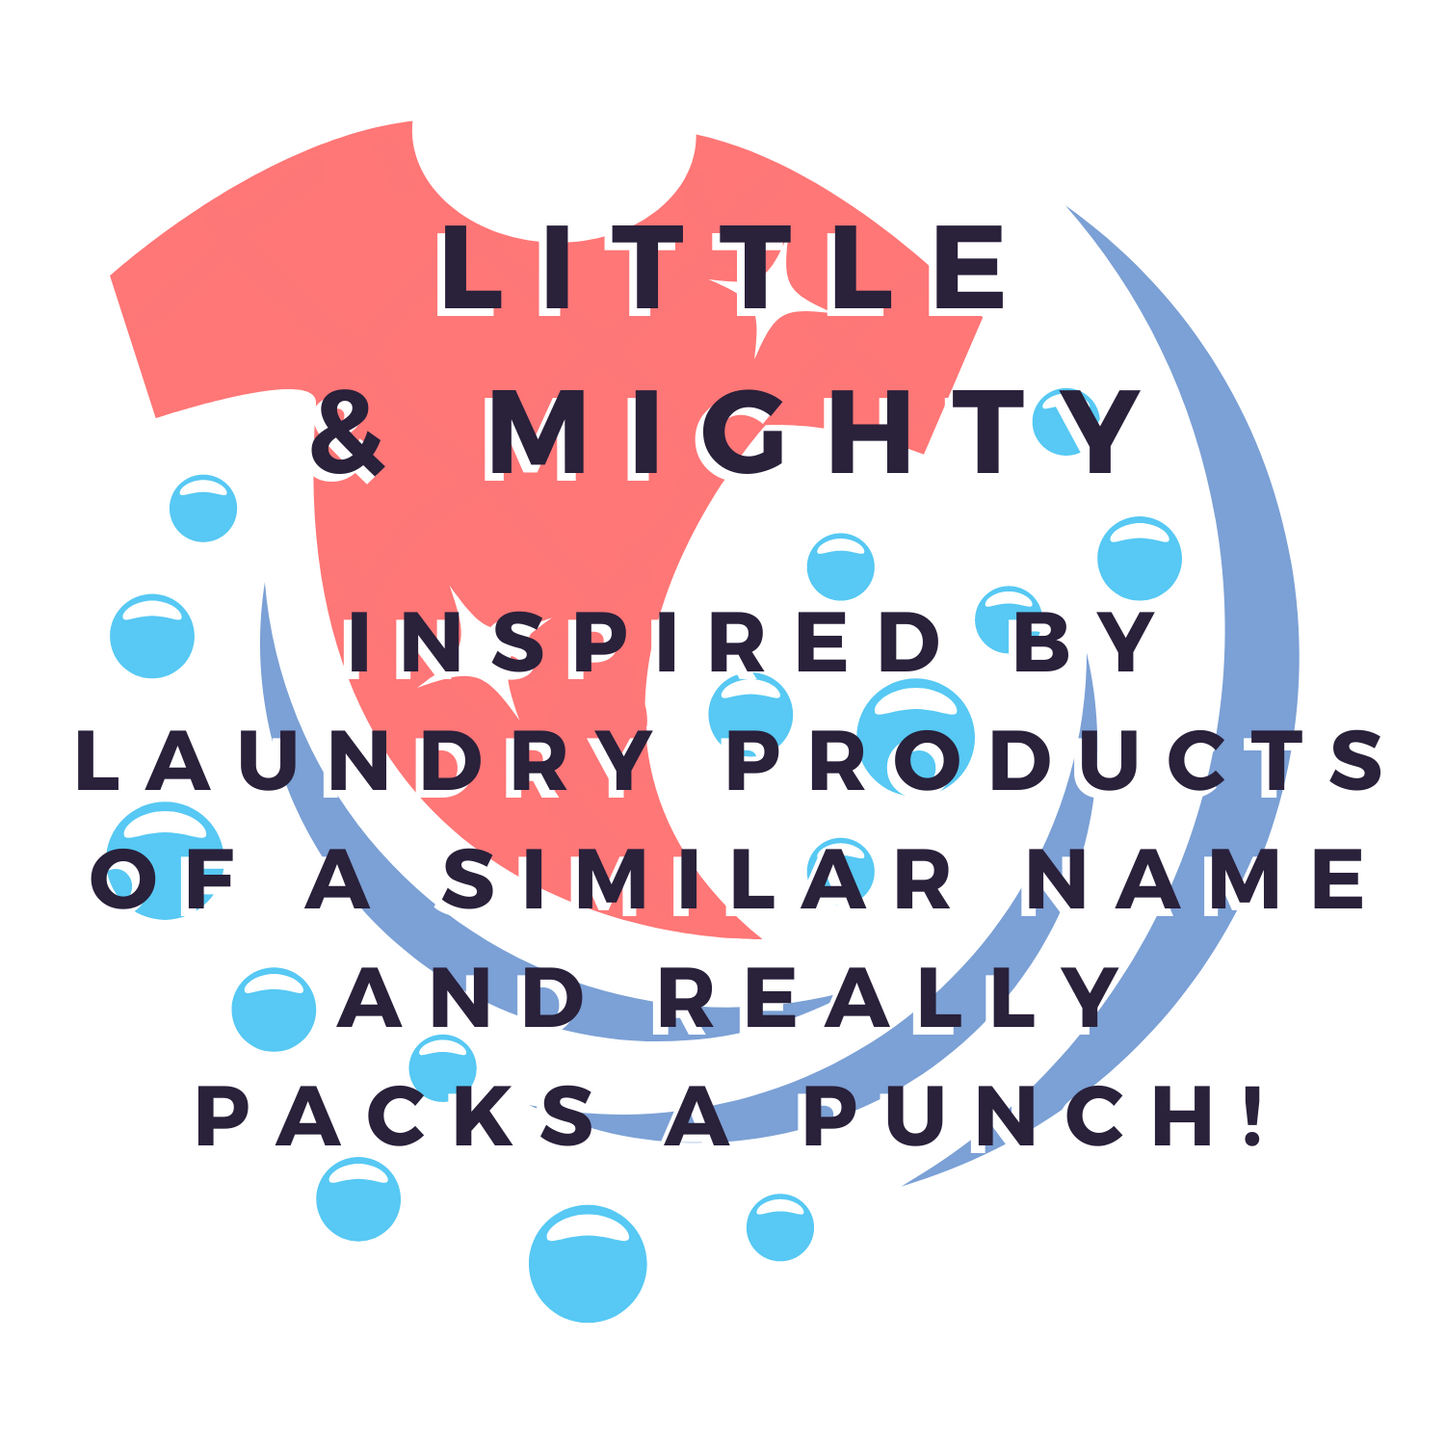 NEW Little & Mighty Wax Bar (laundry scented)